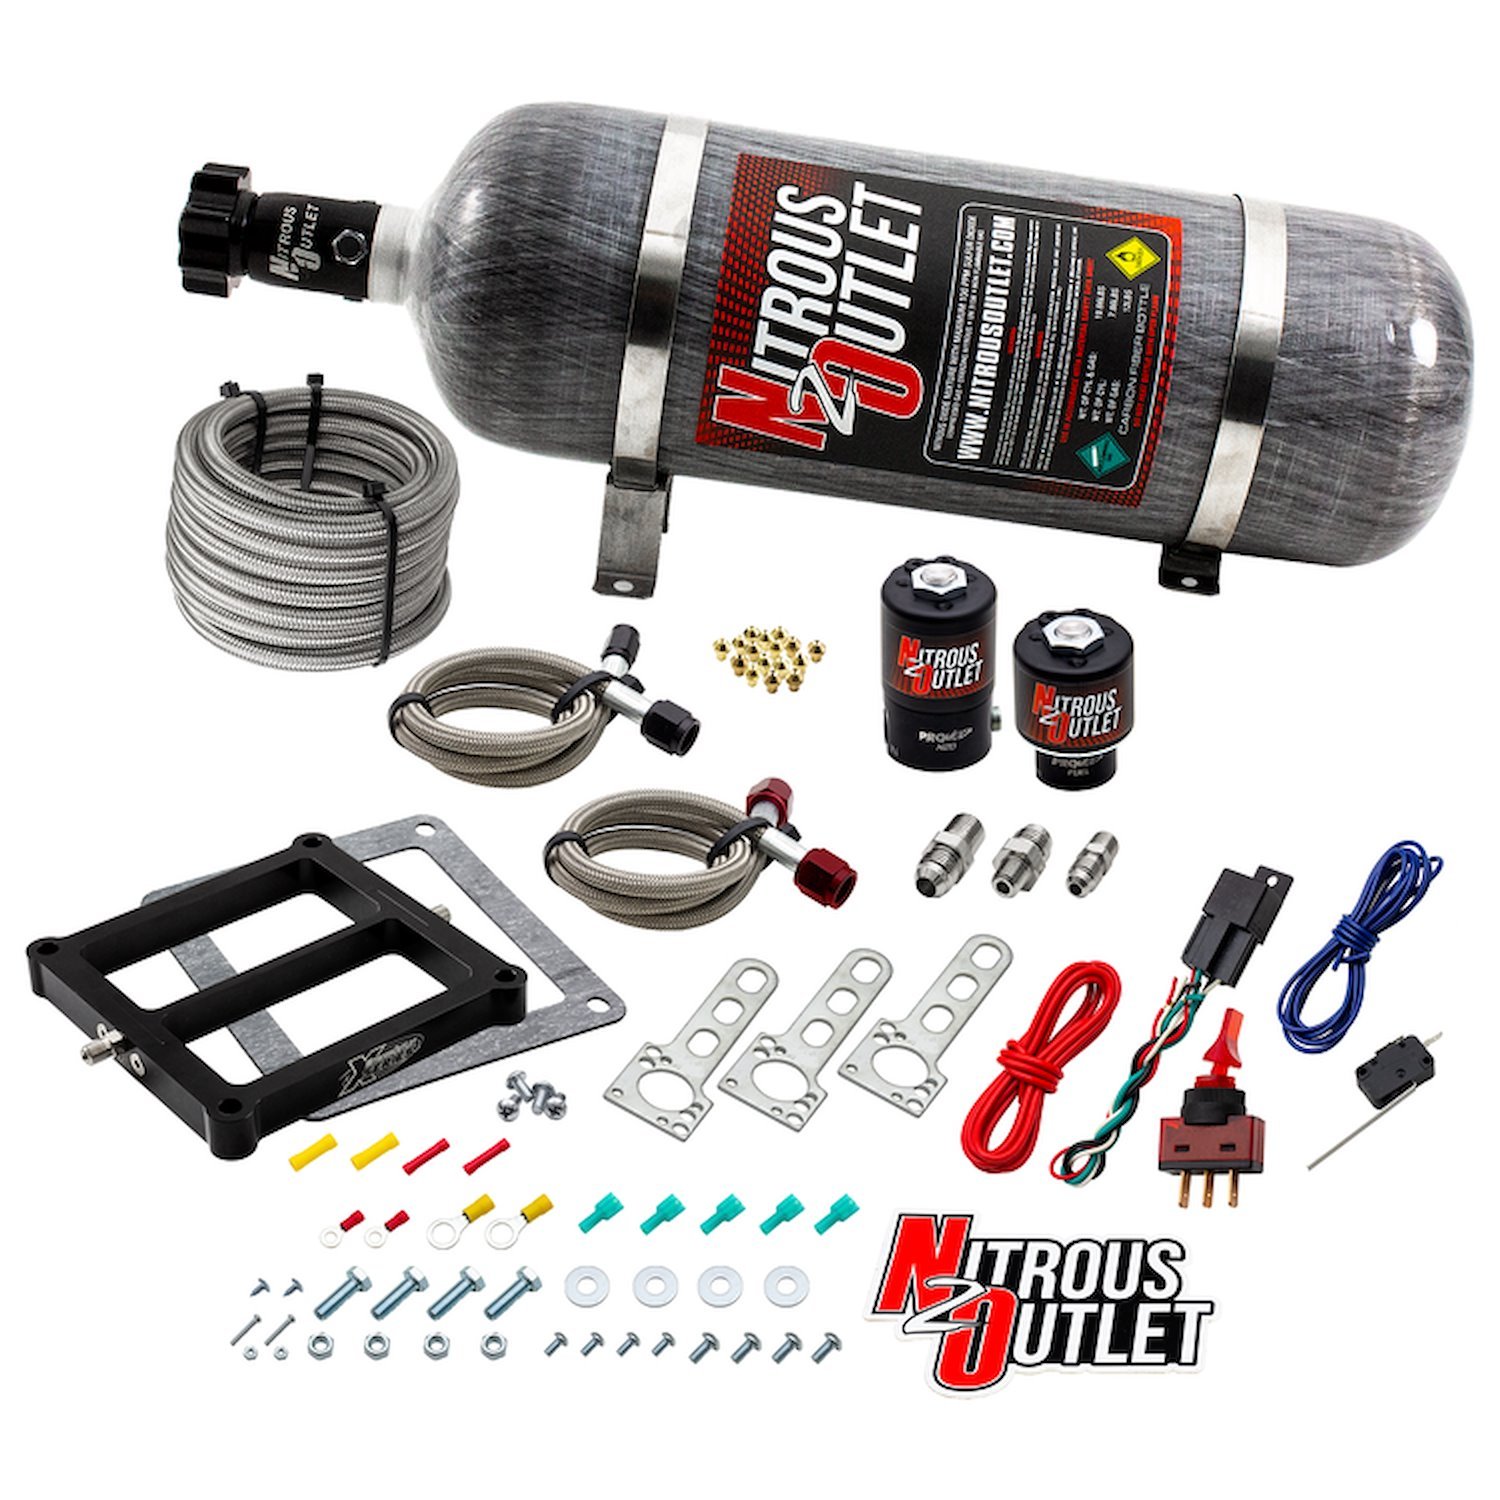 00-10071-12 Weekend Warrior 4500 Plate System, Gas/E85, 5-55psi, 100-350 HP, 12LB Bottle